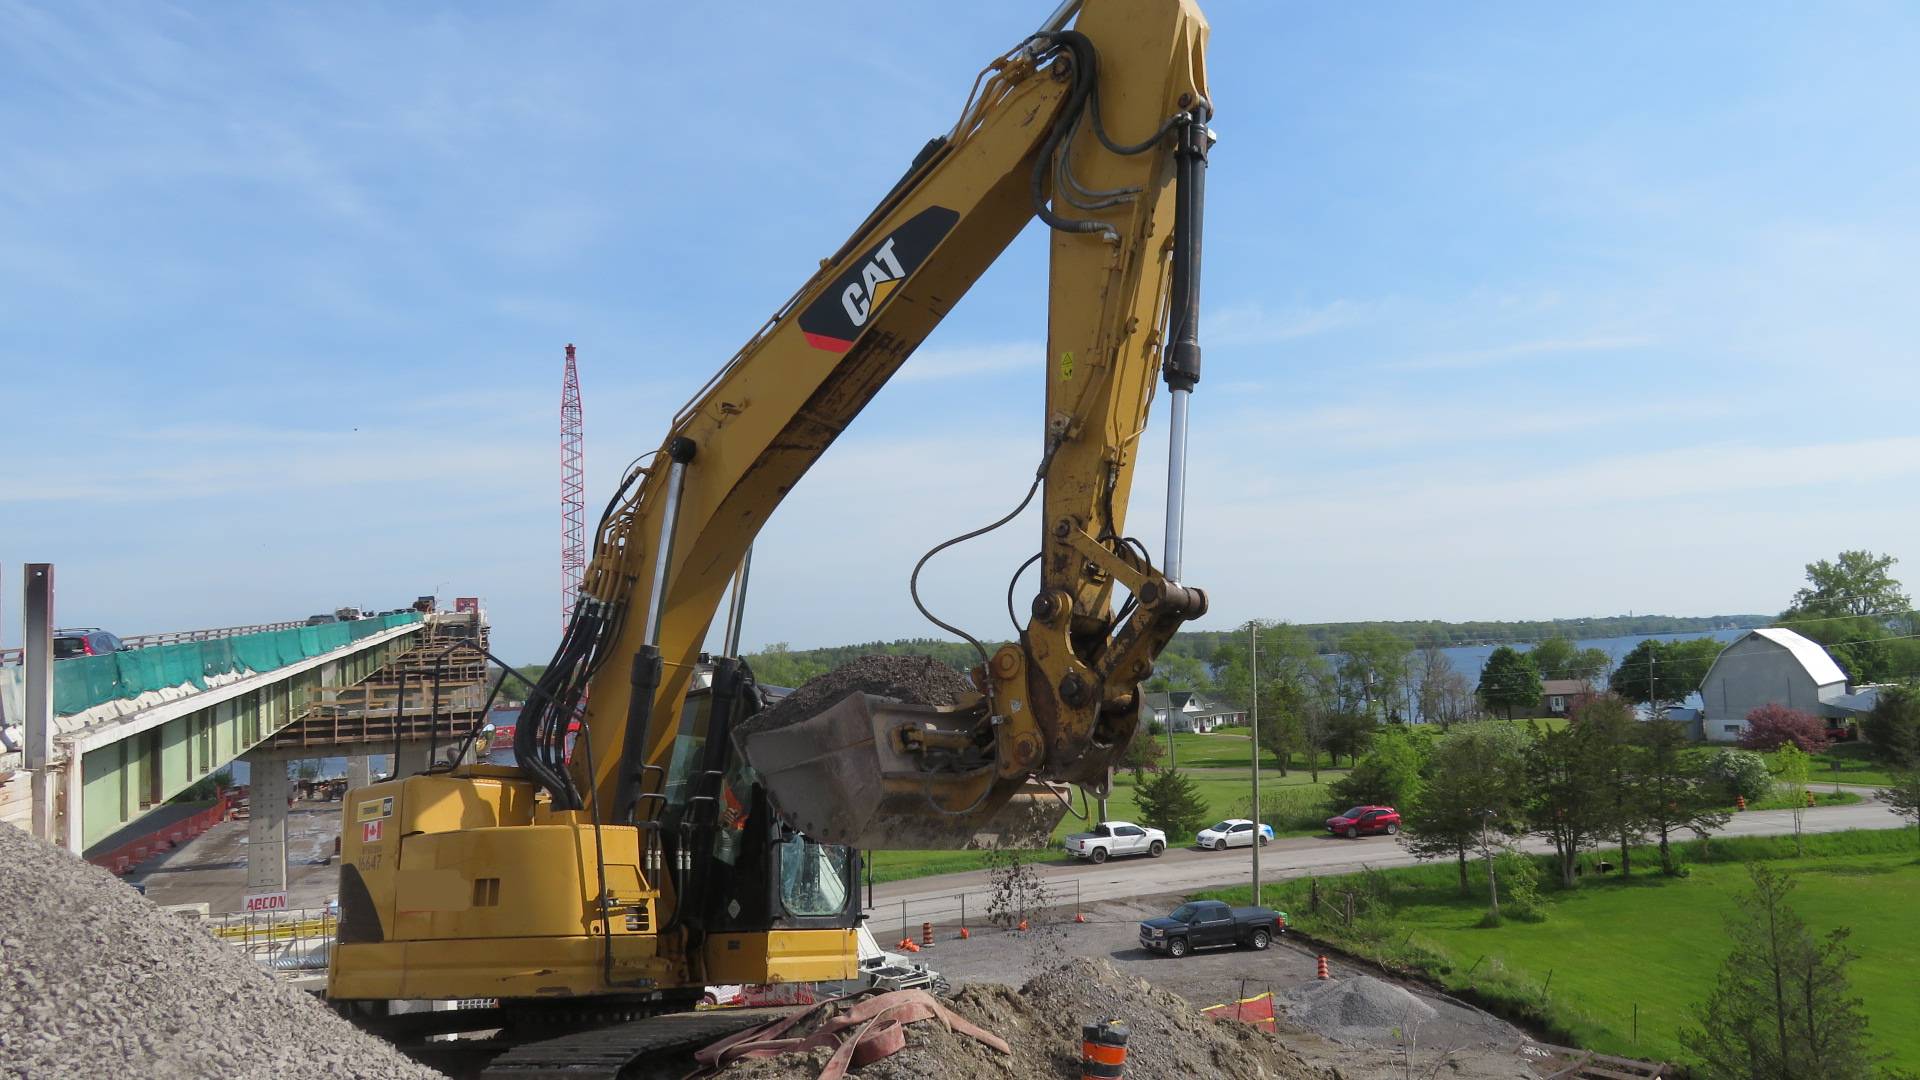 Excavator moving the granular for placement